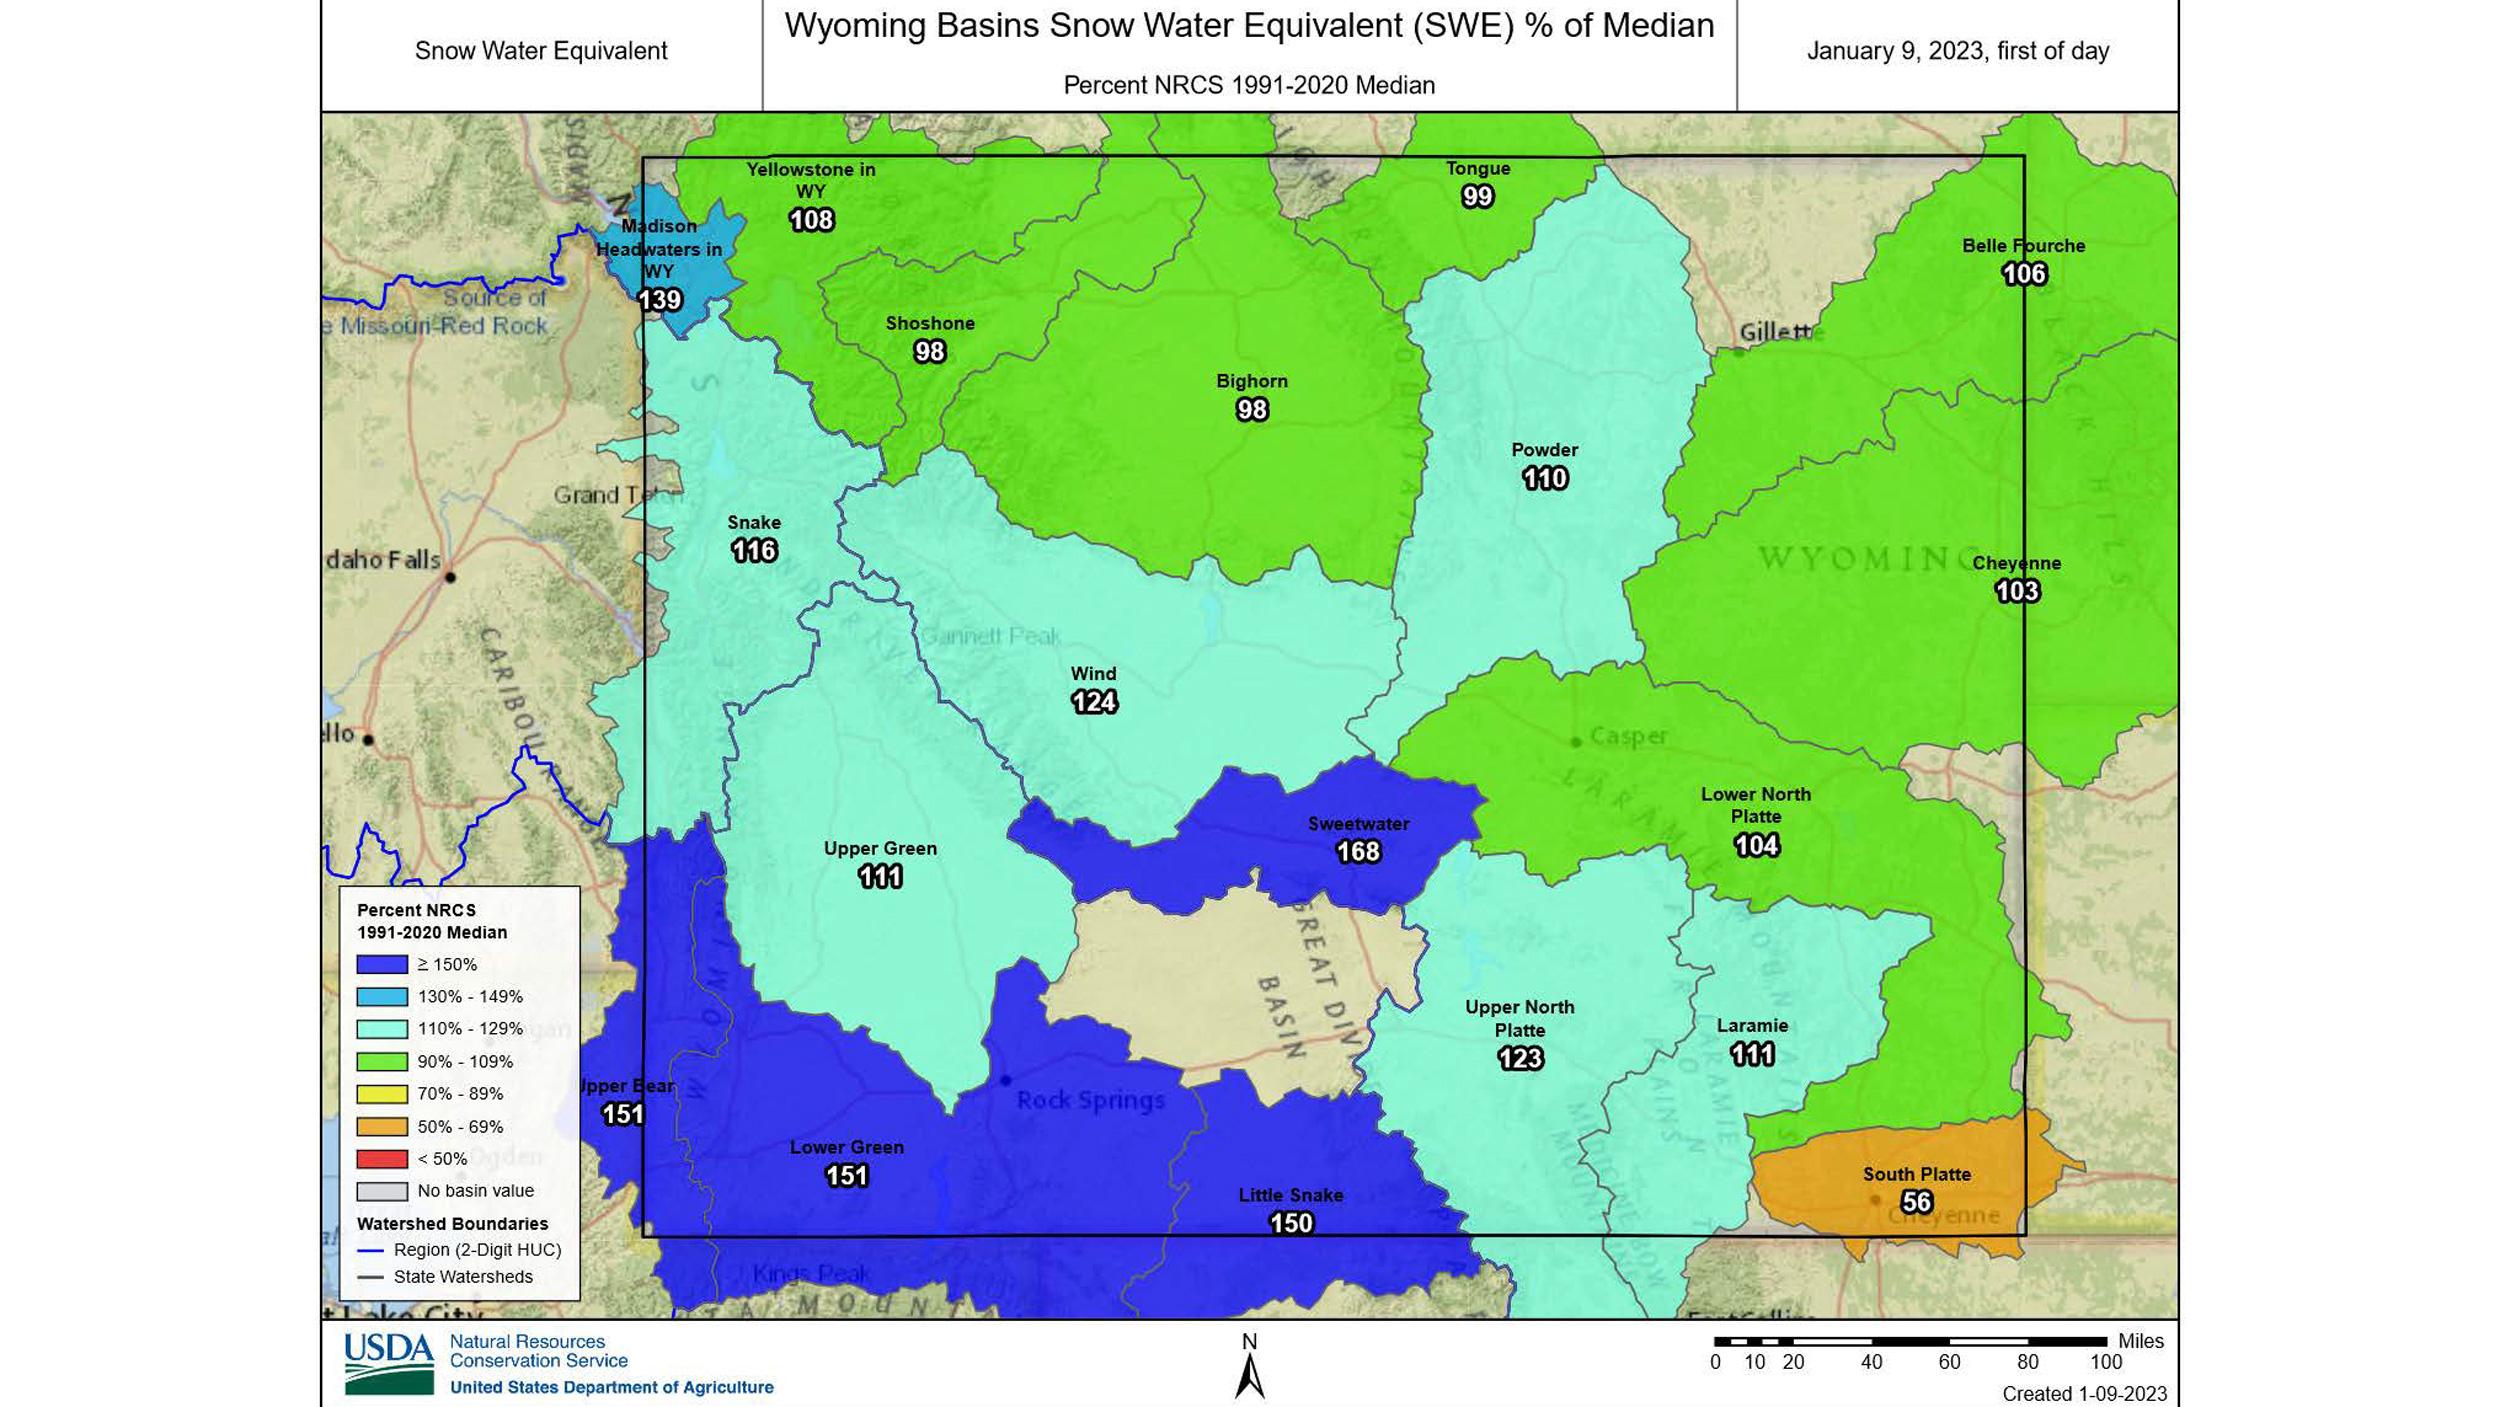 January 2023 Wyoming snow water equivalent map